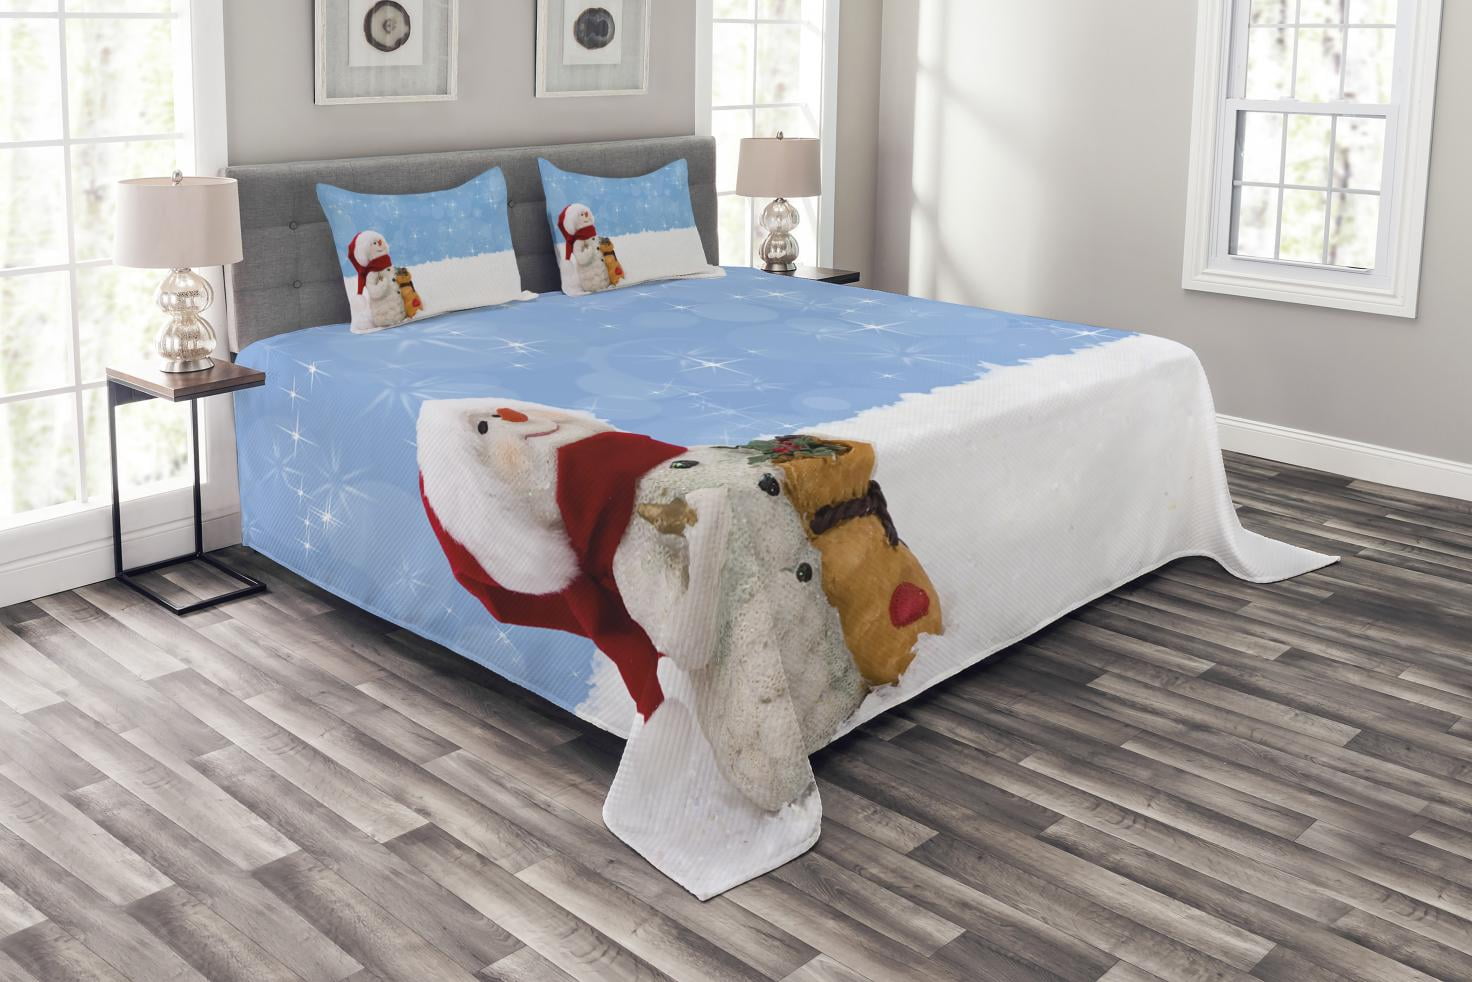 Kids Toddler Design Happy Snowman Cartoon Style Merry Christmas Theme Pale Blue White Ambesonne Winter Bedspread Queen Size Decorative Quilted 3 Piece Coverlet Set with 2 Pillow Shams